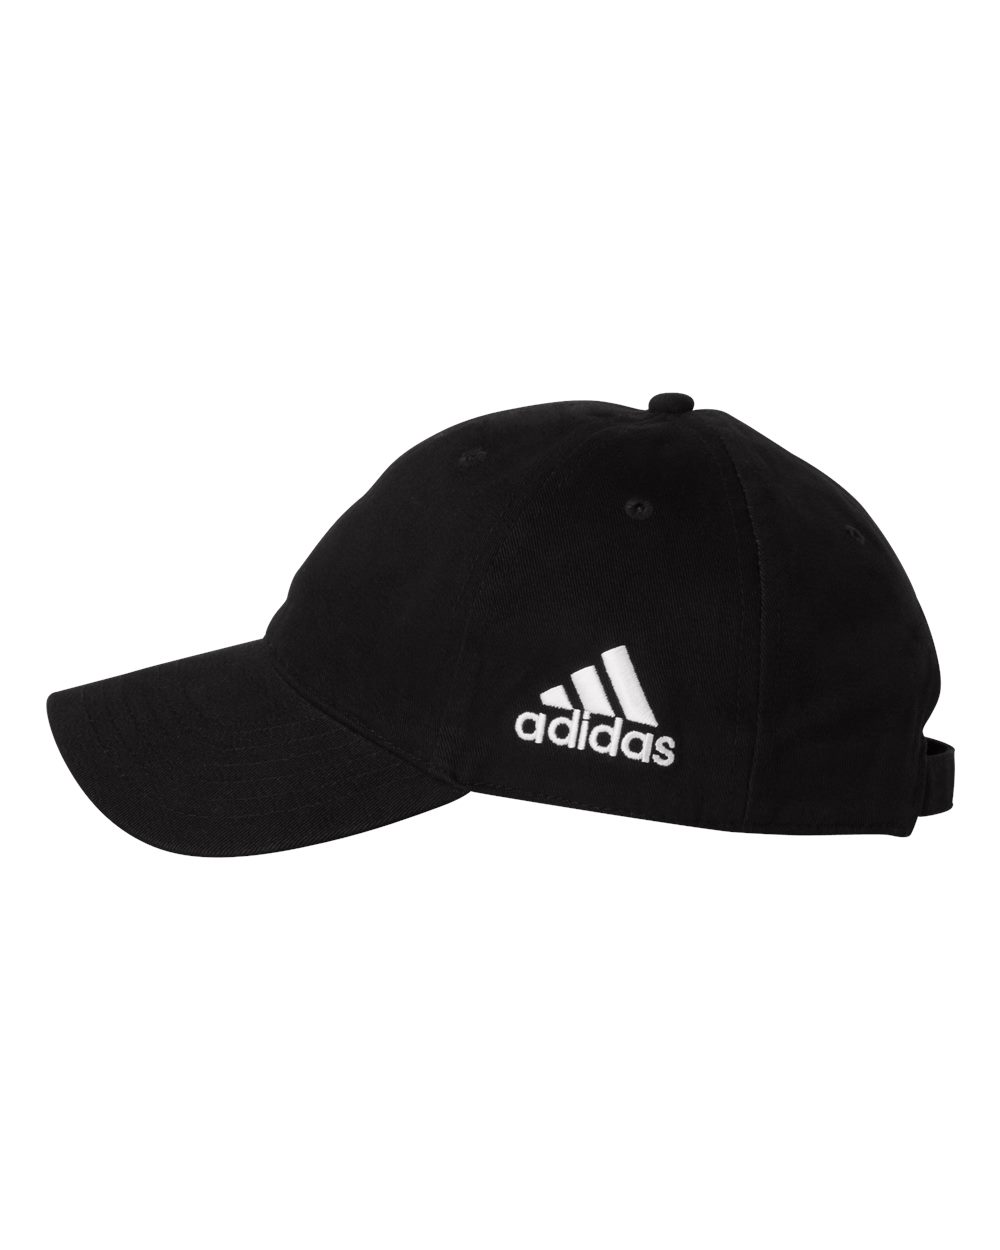 ADIDAS CORE PERFORMANCE RELAXED CAP